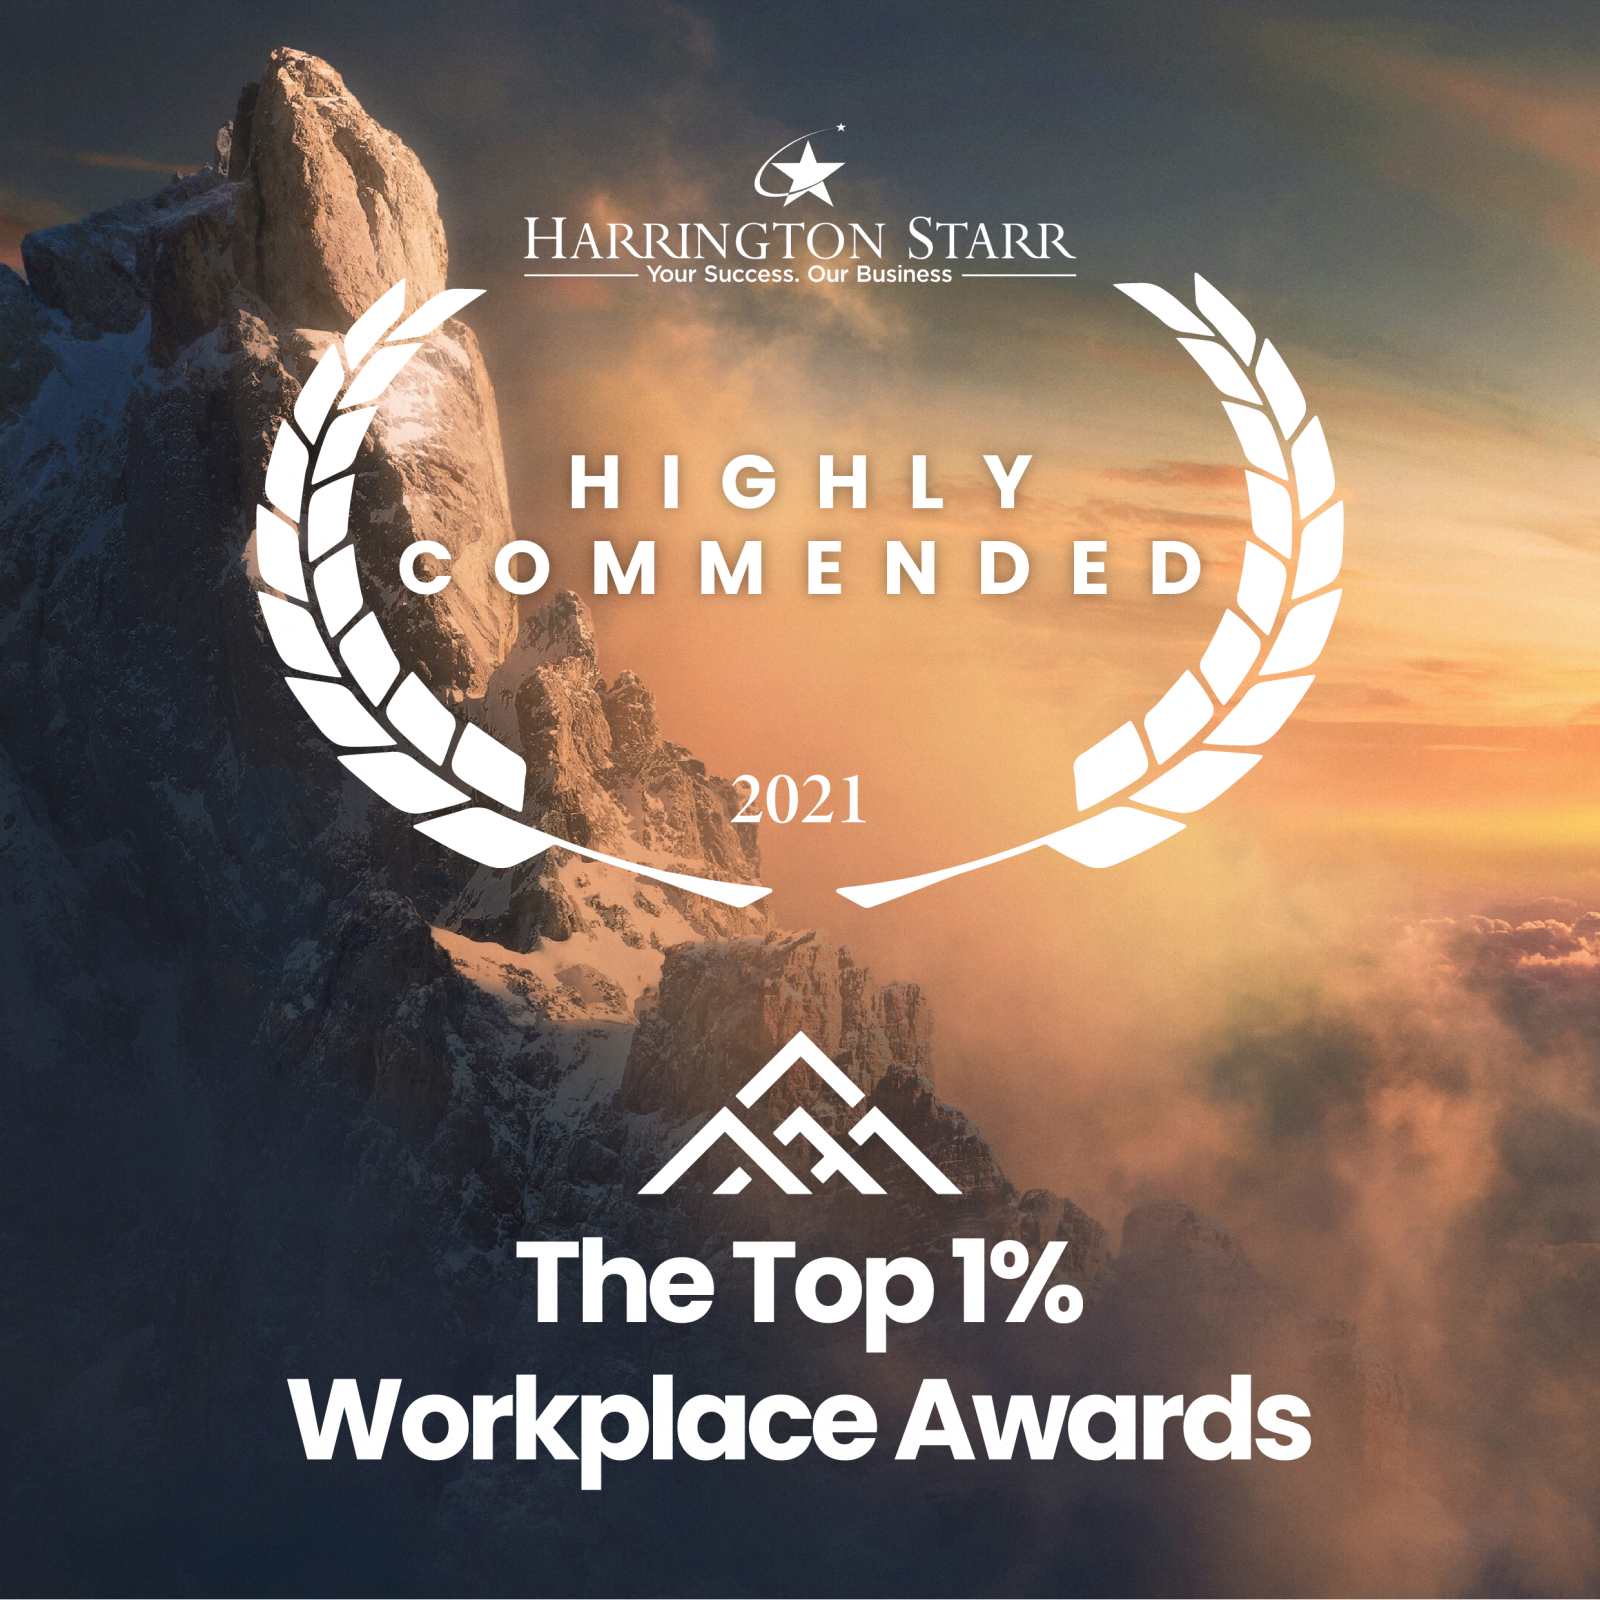 Featured in The Top 1% Workplace Awards